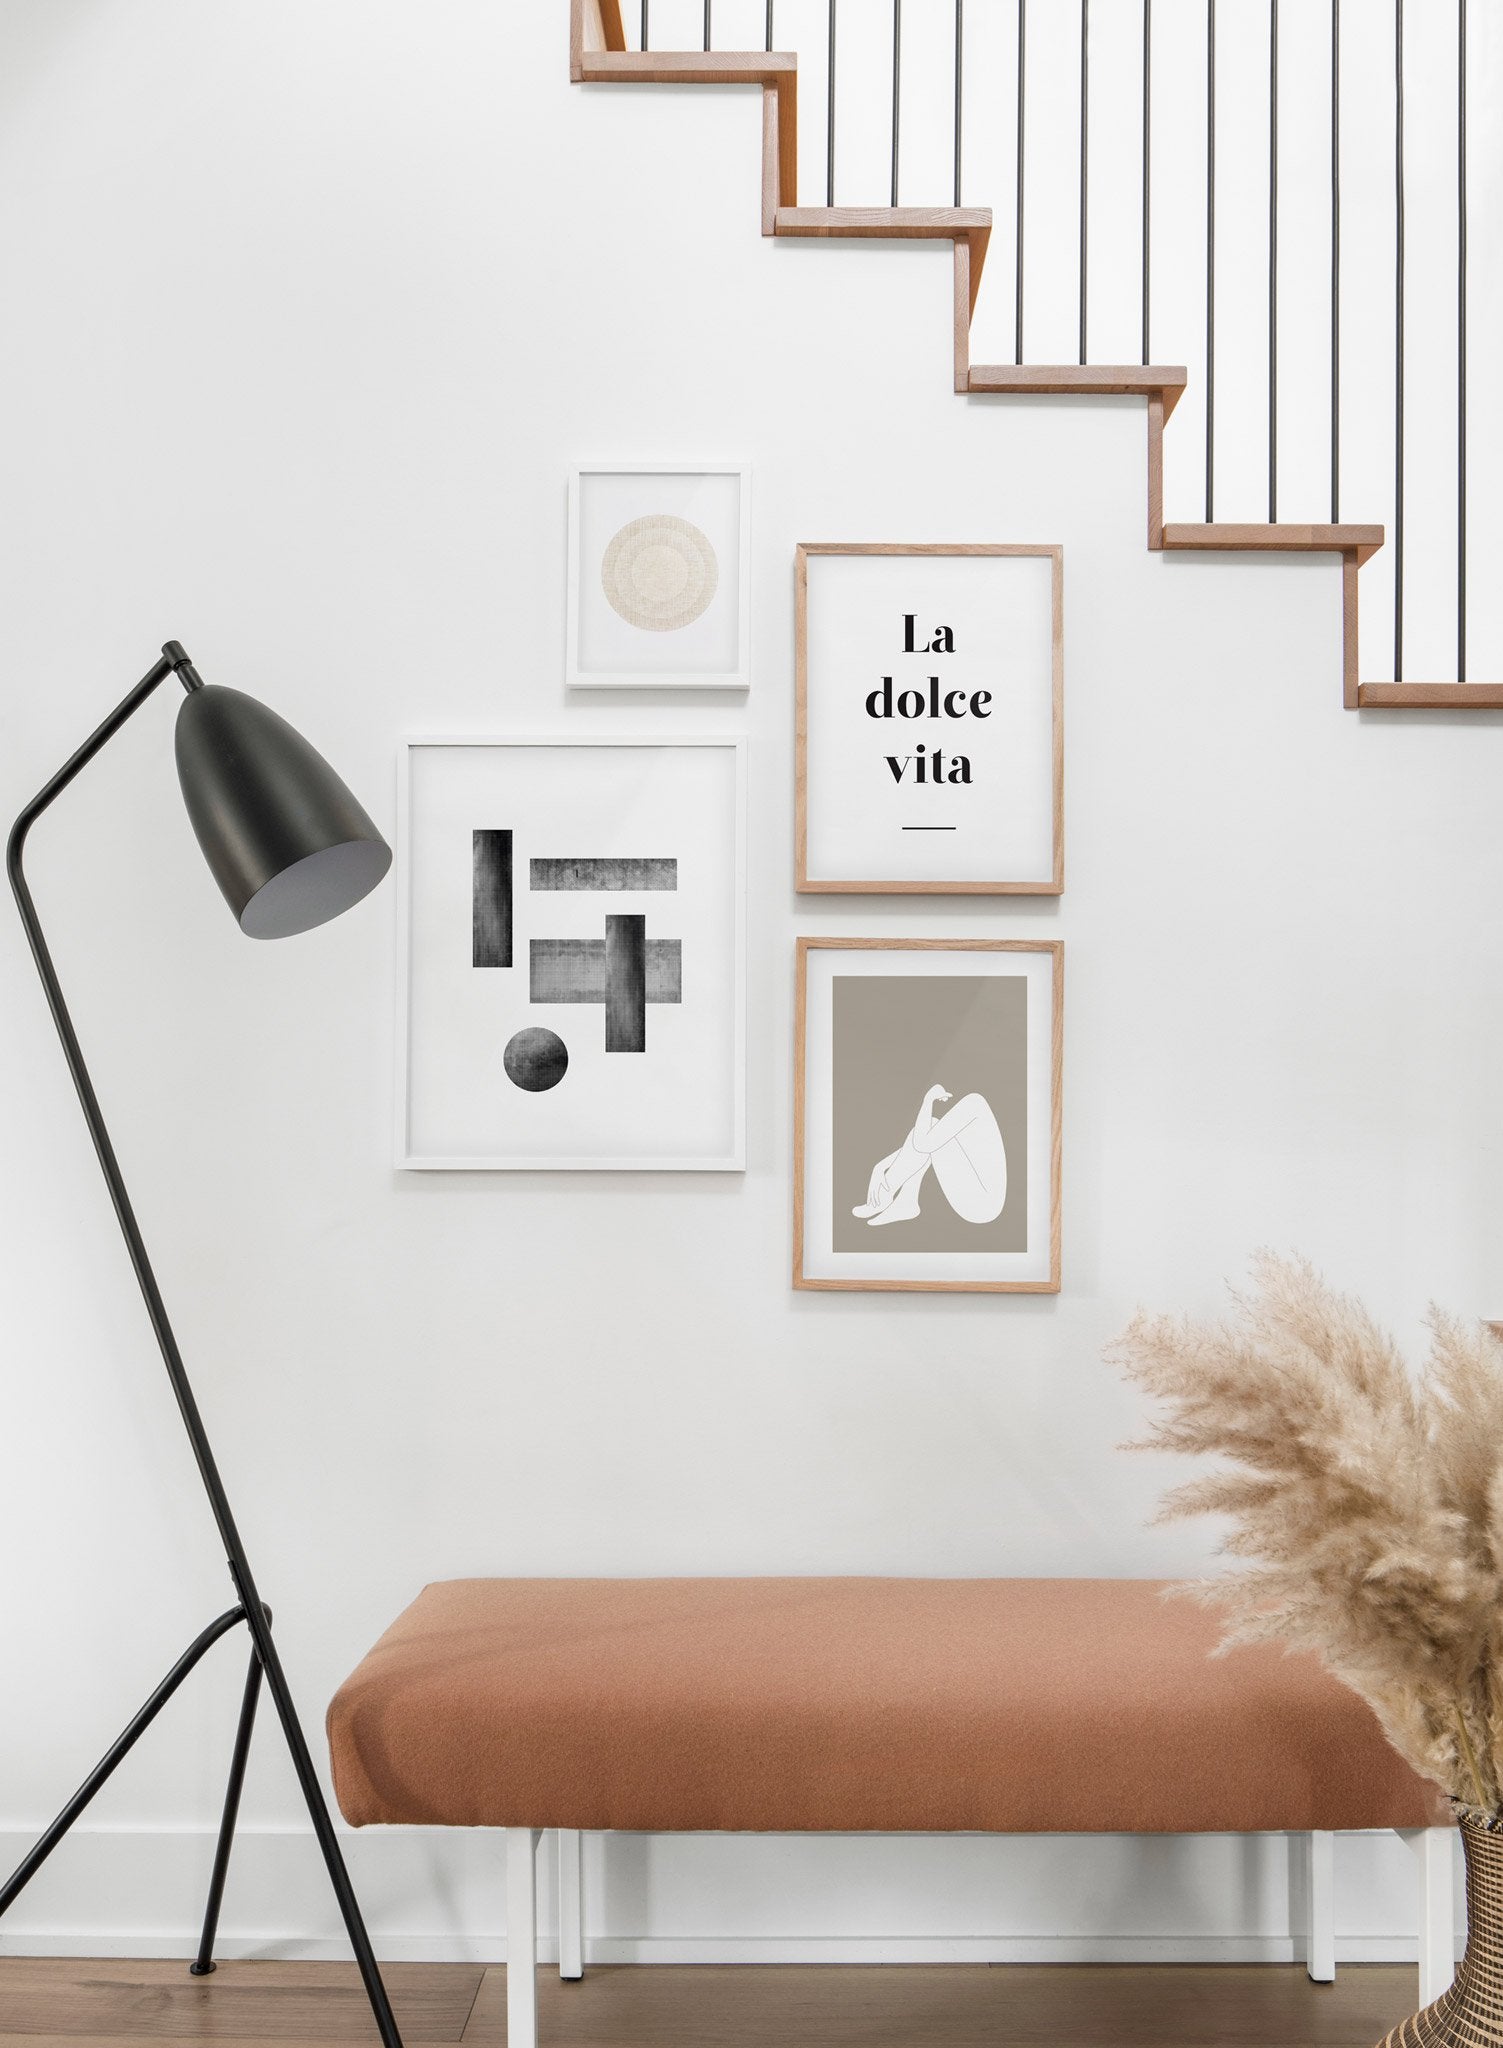 Minimalist design poster by Opposite Wall with abstract rectangle figures - Hallway with a staircase